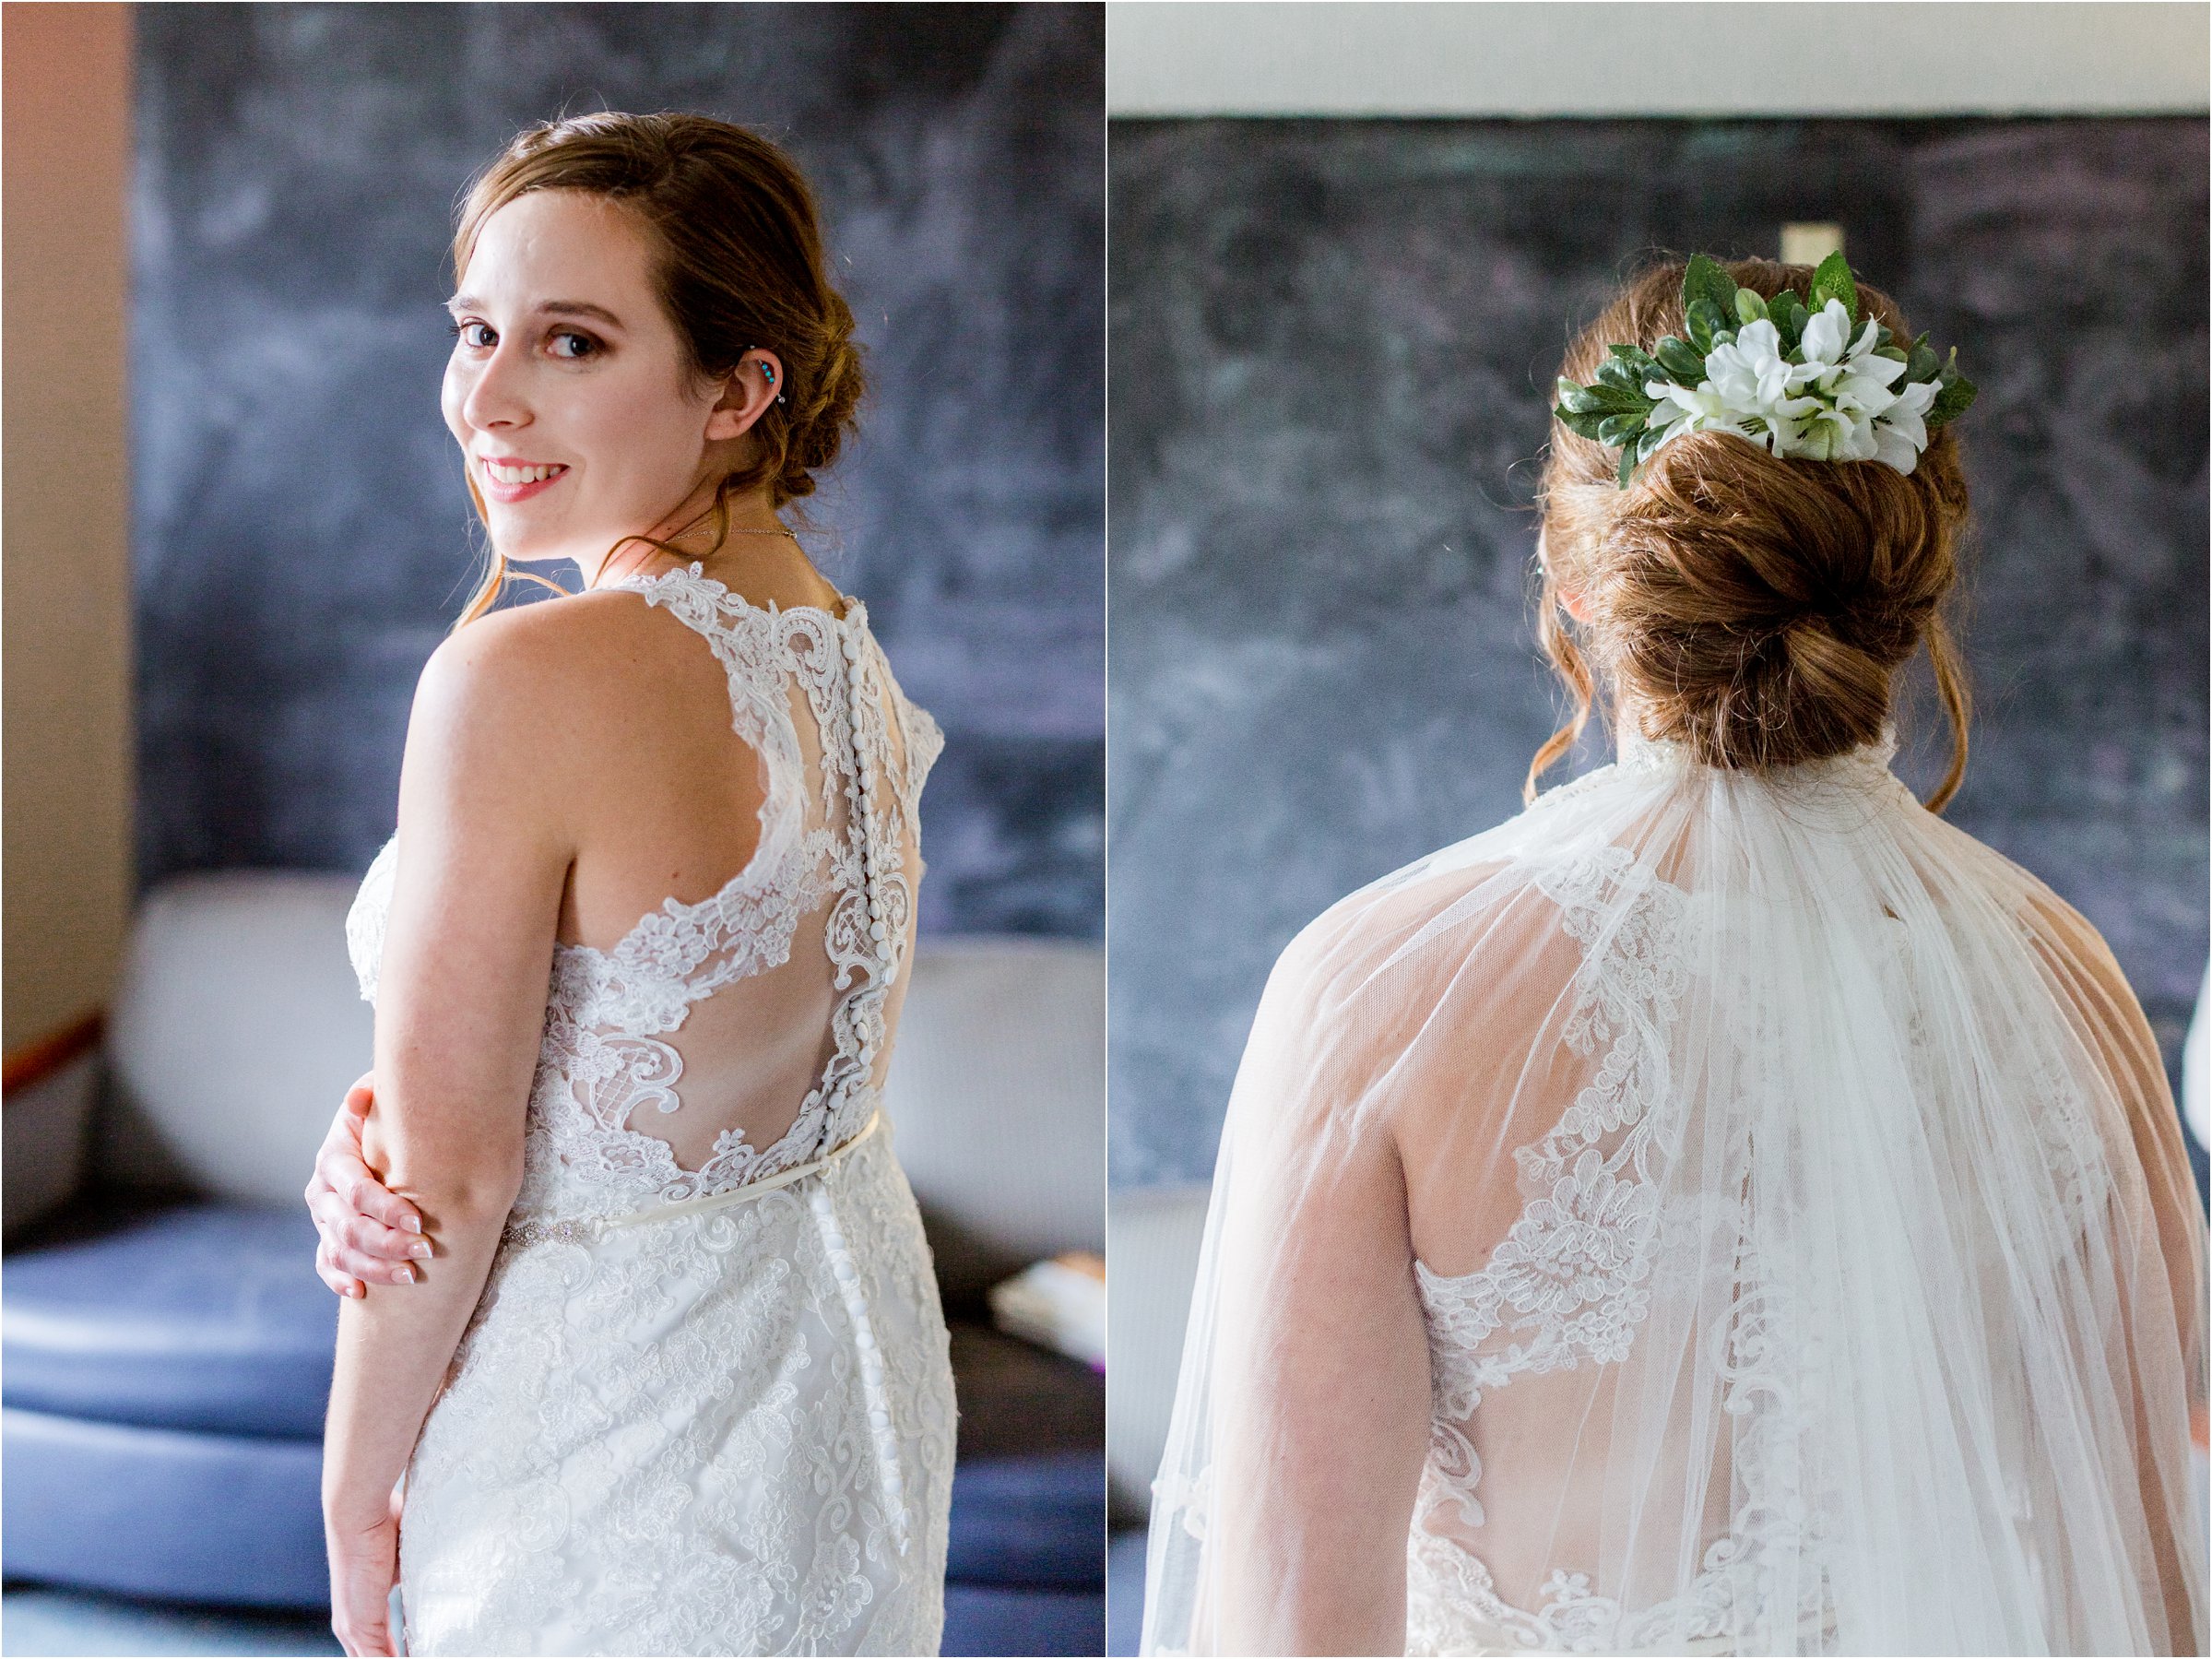 portrait of bride immediately after getting into wedding dress showing off her hair and flower piece